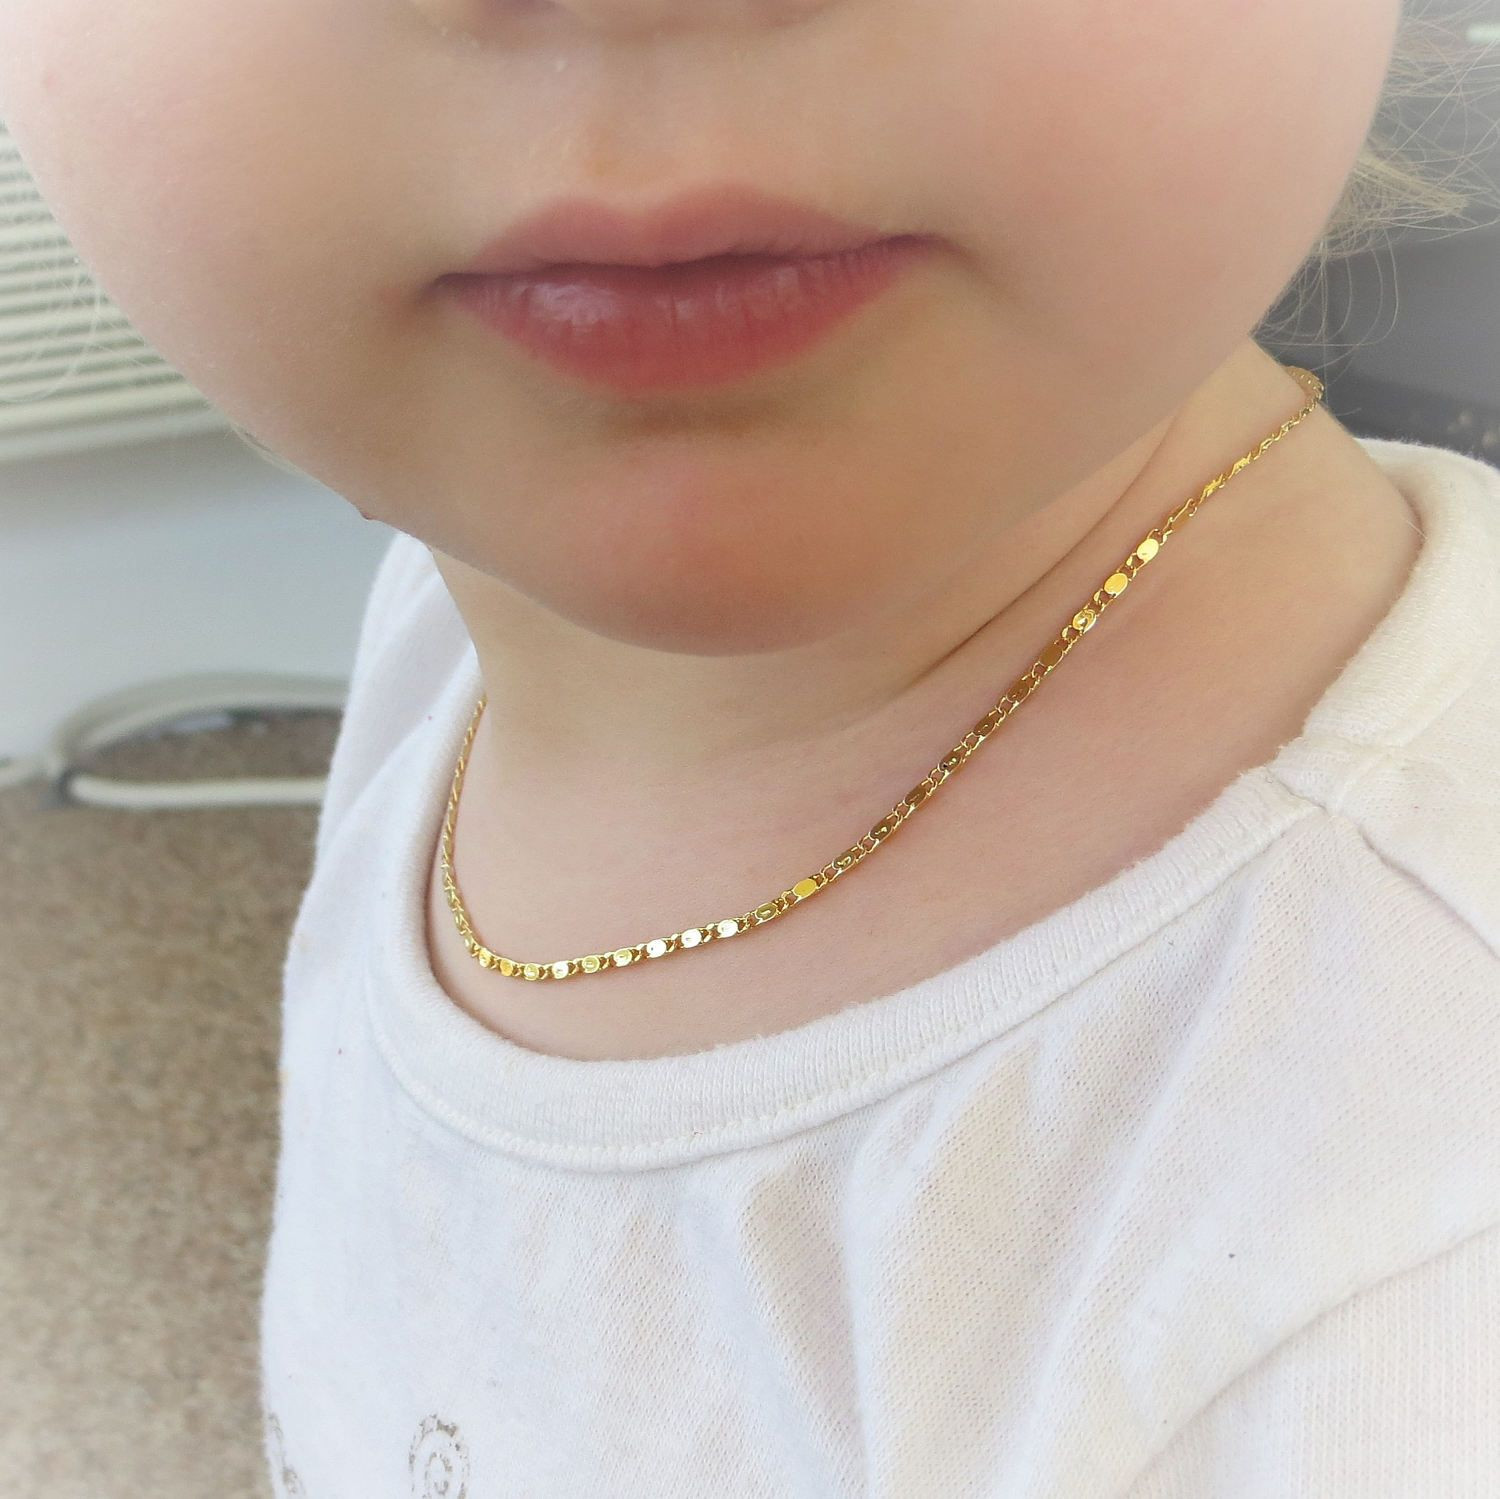 Baby Girl Gold Necklace
 Jewelry for Girls Necklace for Baby Flower Girl Jewelry